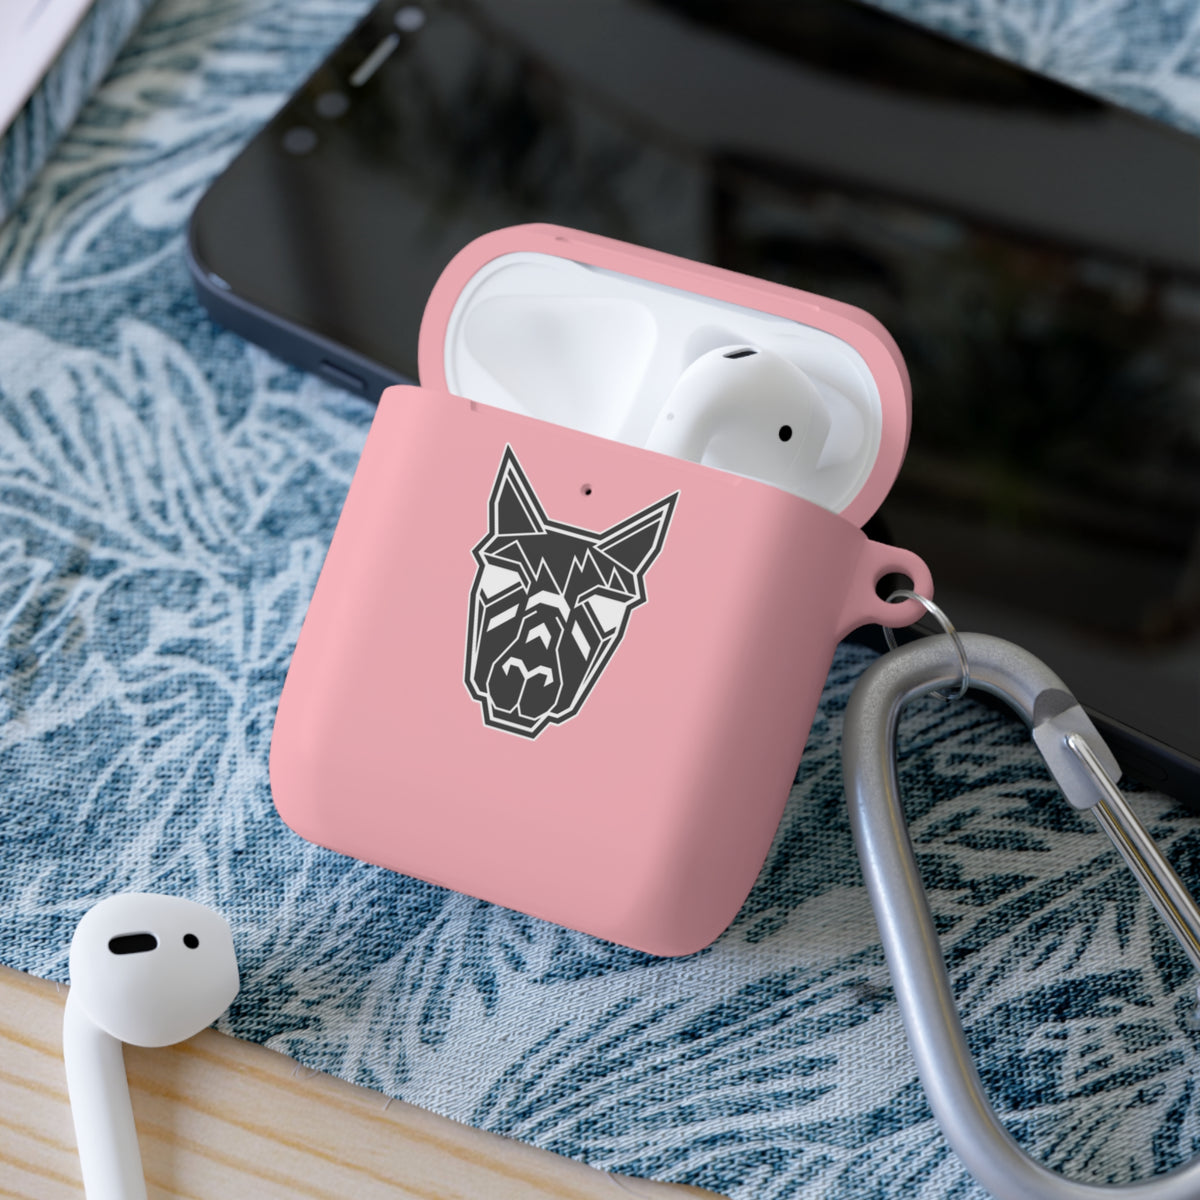 AlpaKa - AirPods and AirPods Pro Case Cover